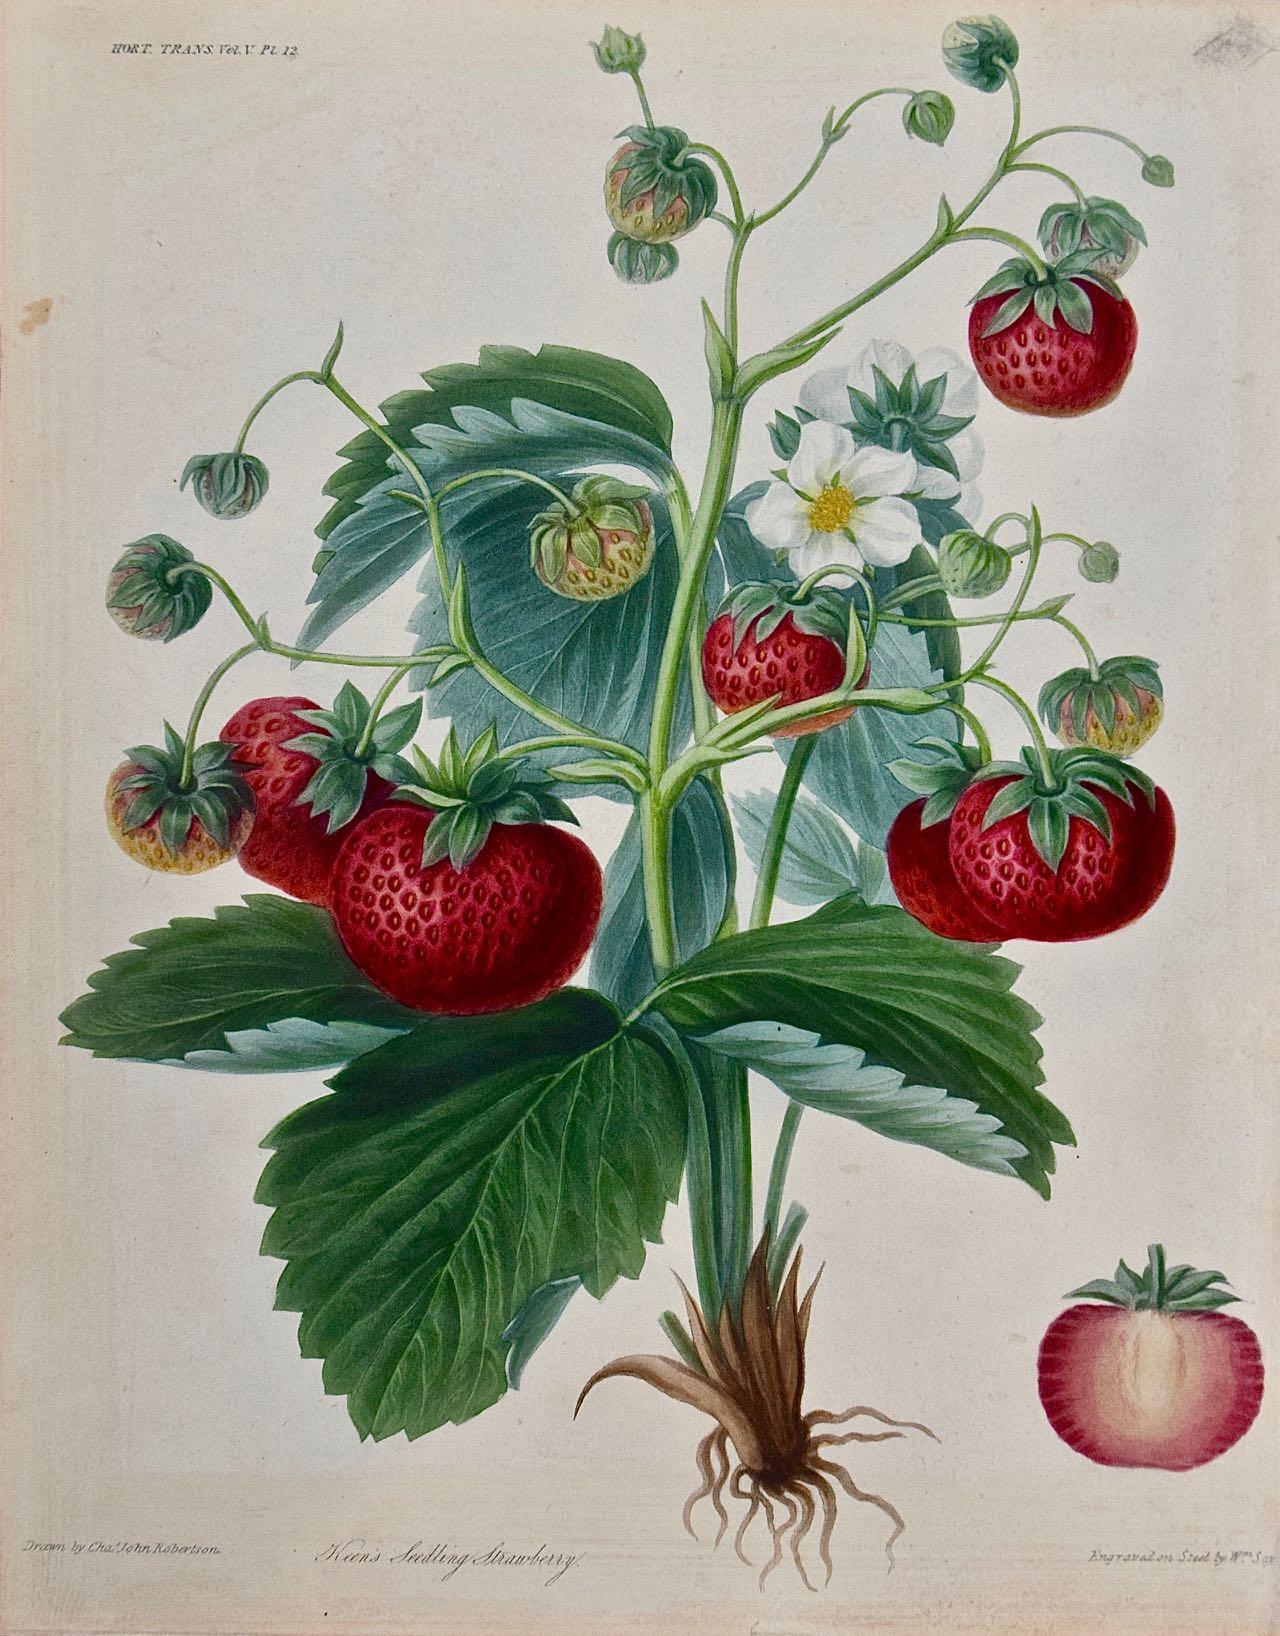 Charles Robertson Landscape Print - Flowering Strawberry Plants with Fruit: A 19th Century Hand-colored Engraving